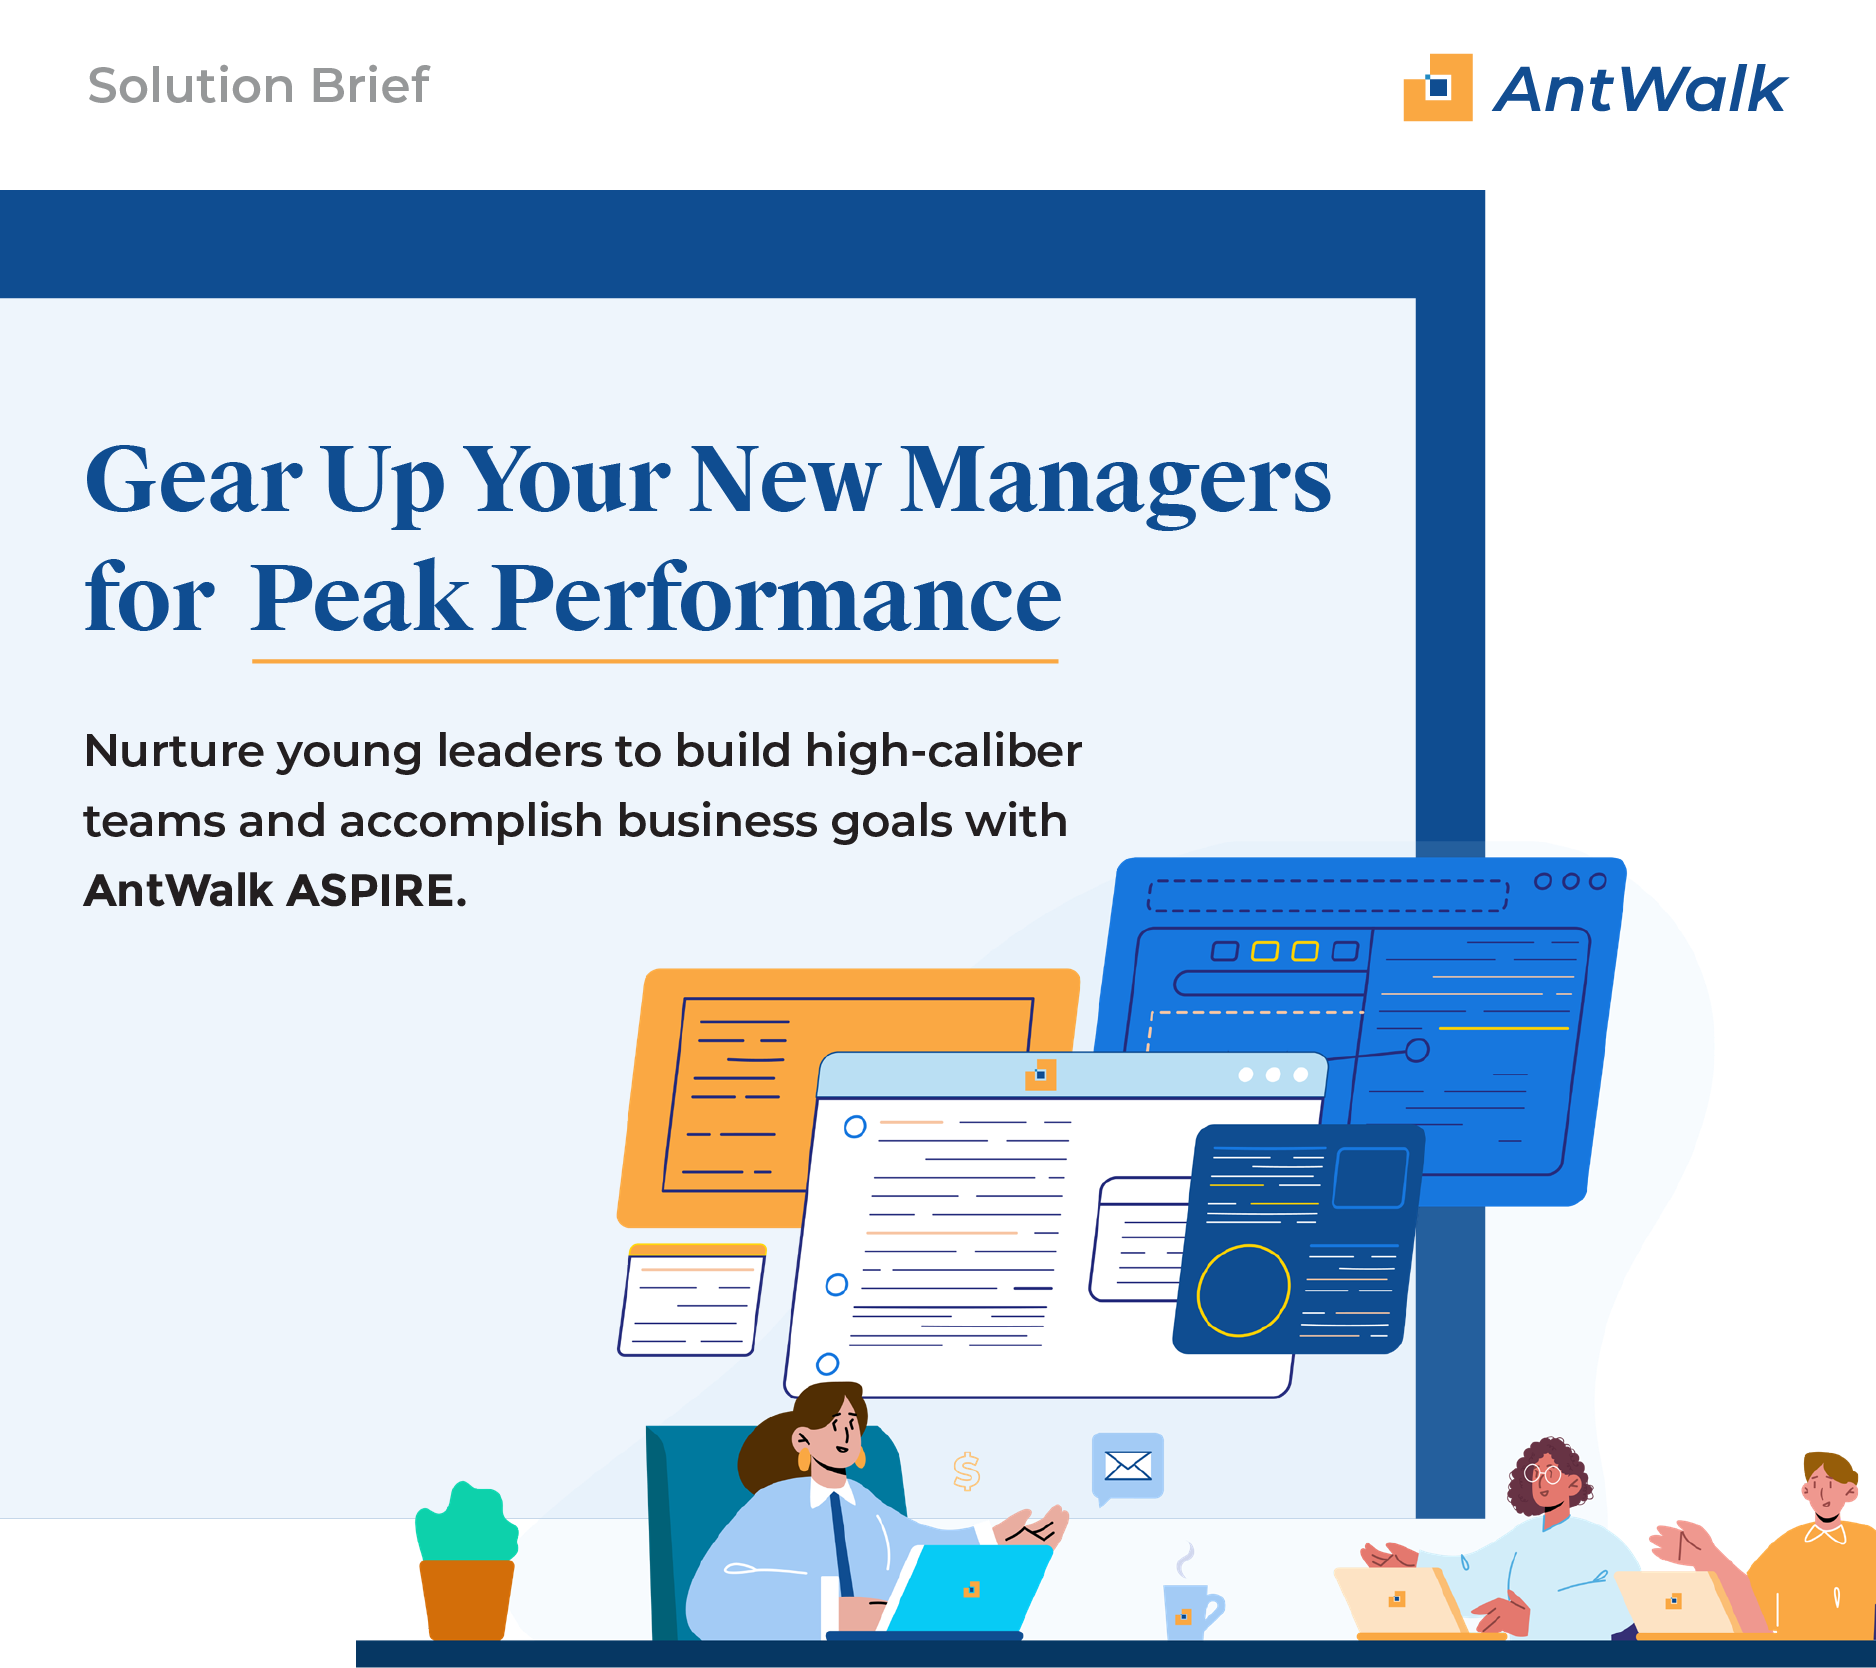 Gear Up Your New Managers for Peak Performance